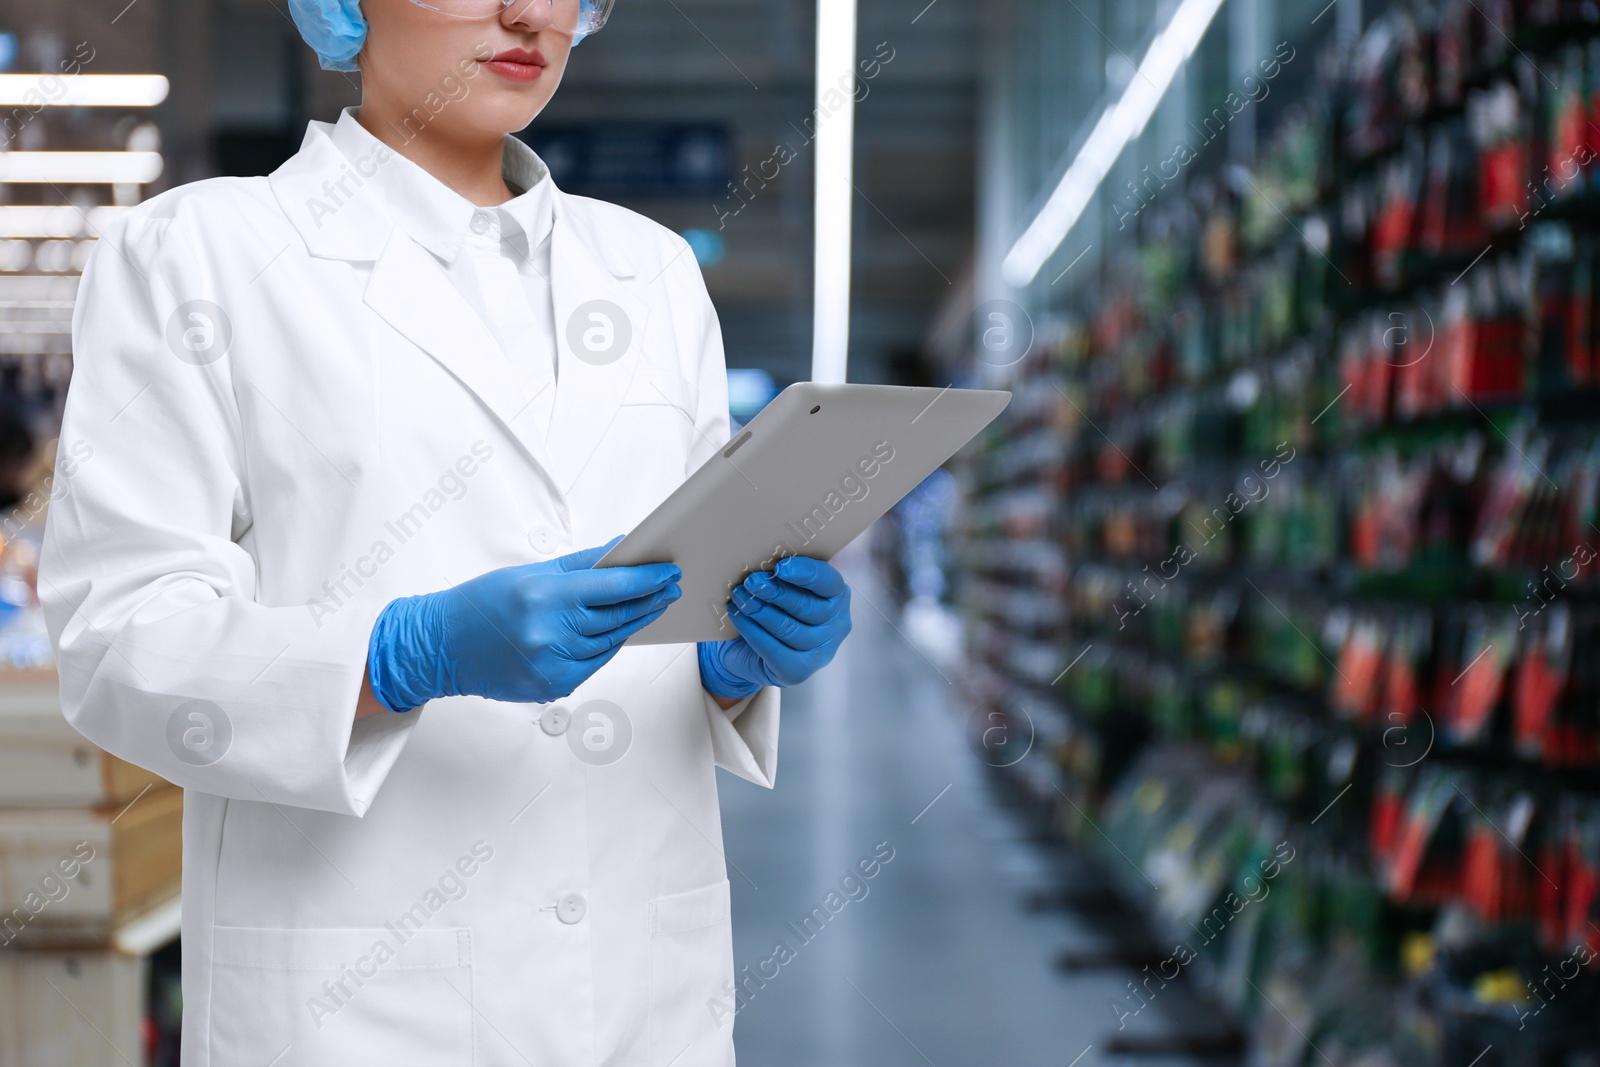 Image of Food quality control specialist examining products in supermarket, closeup